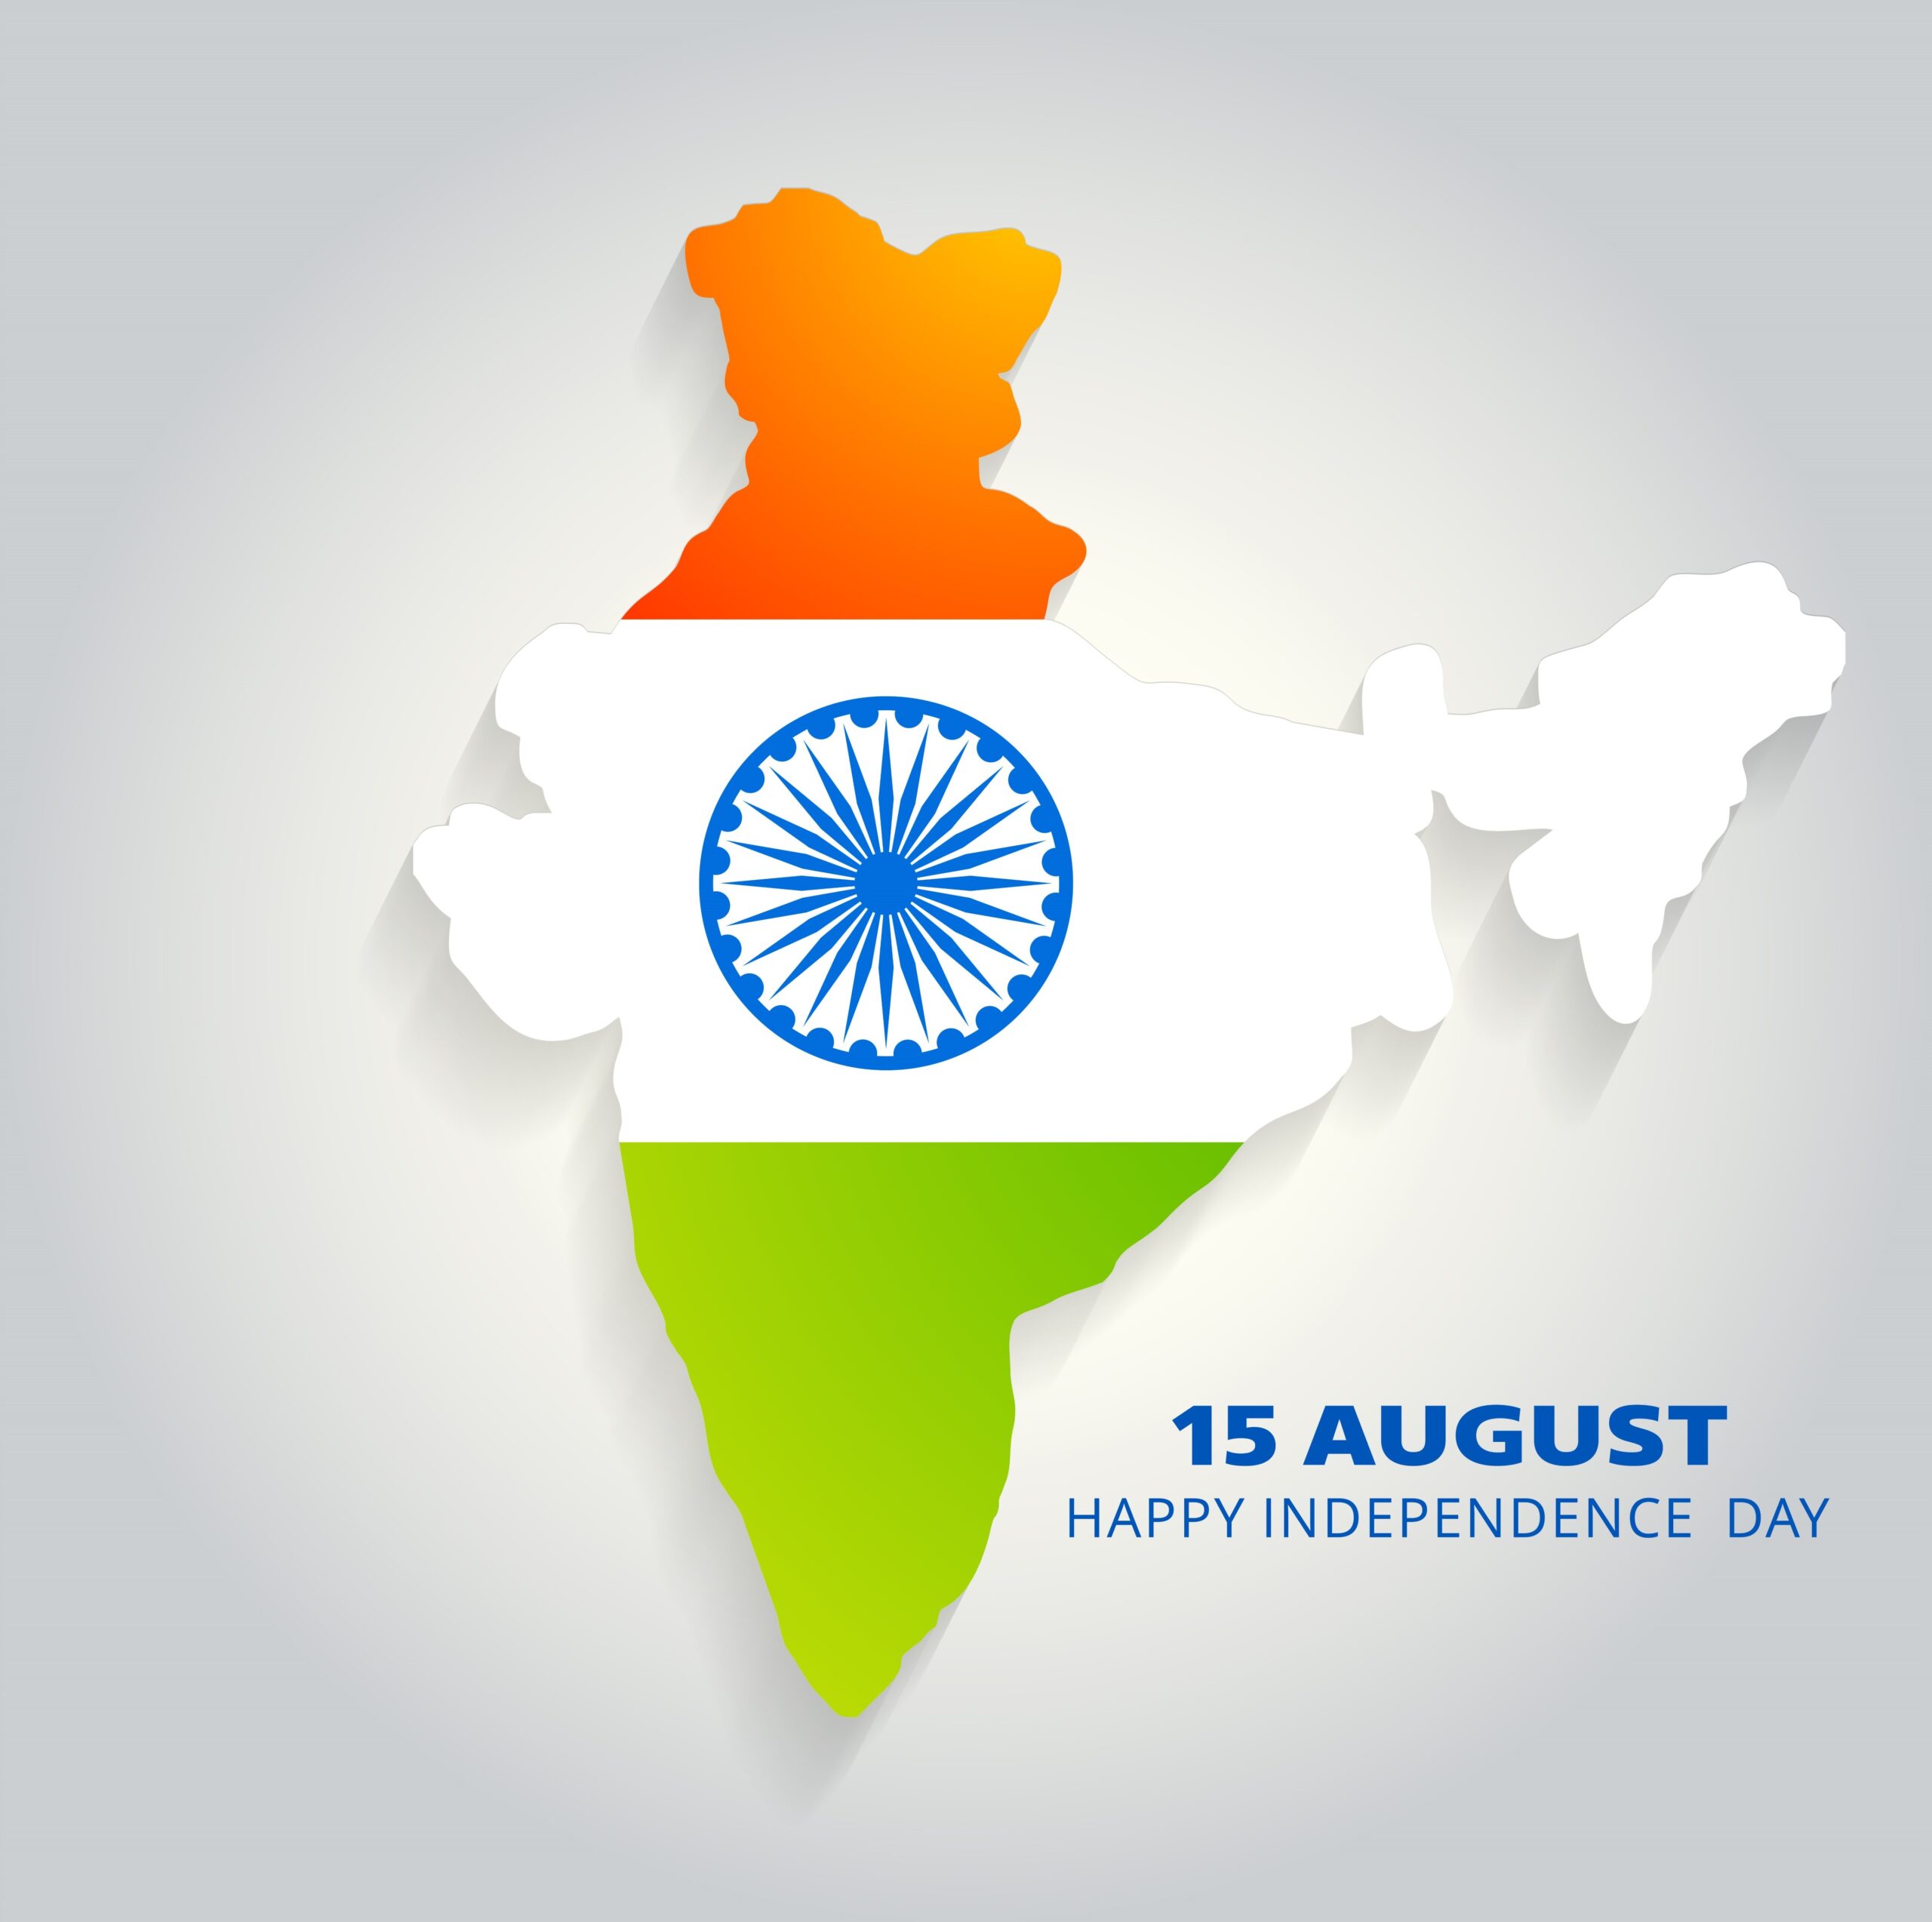 Happy Independence Day (15 August) 2021 Image Free Download